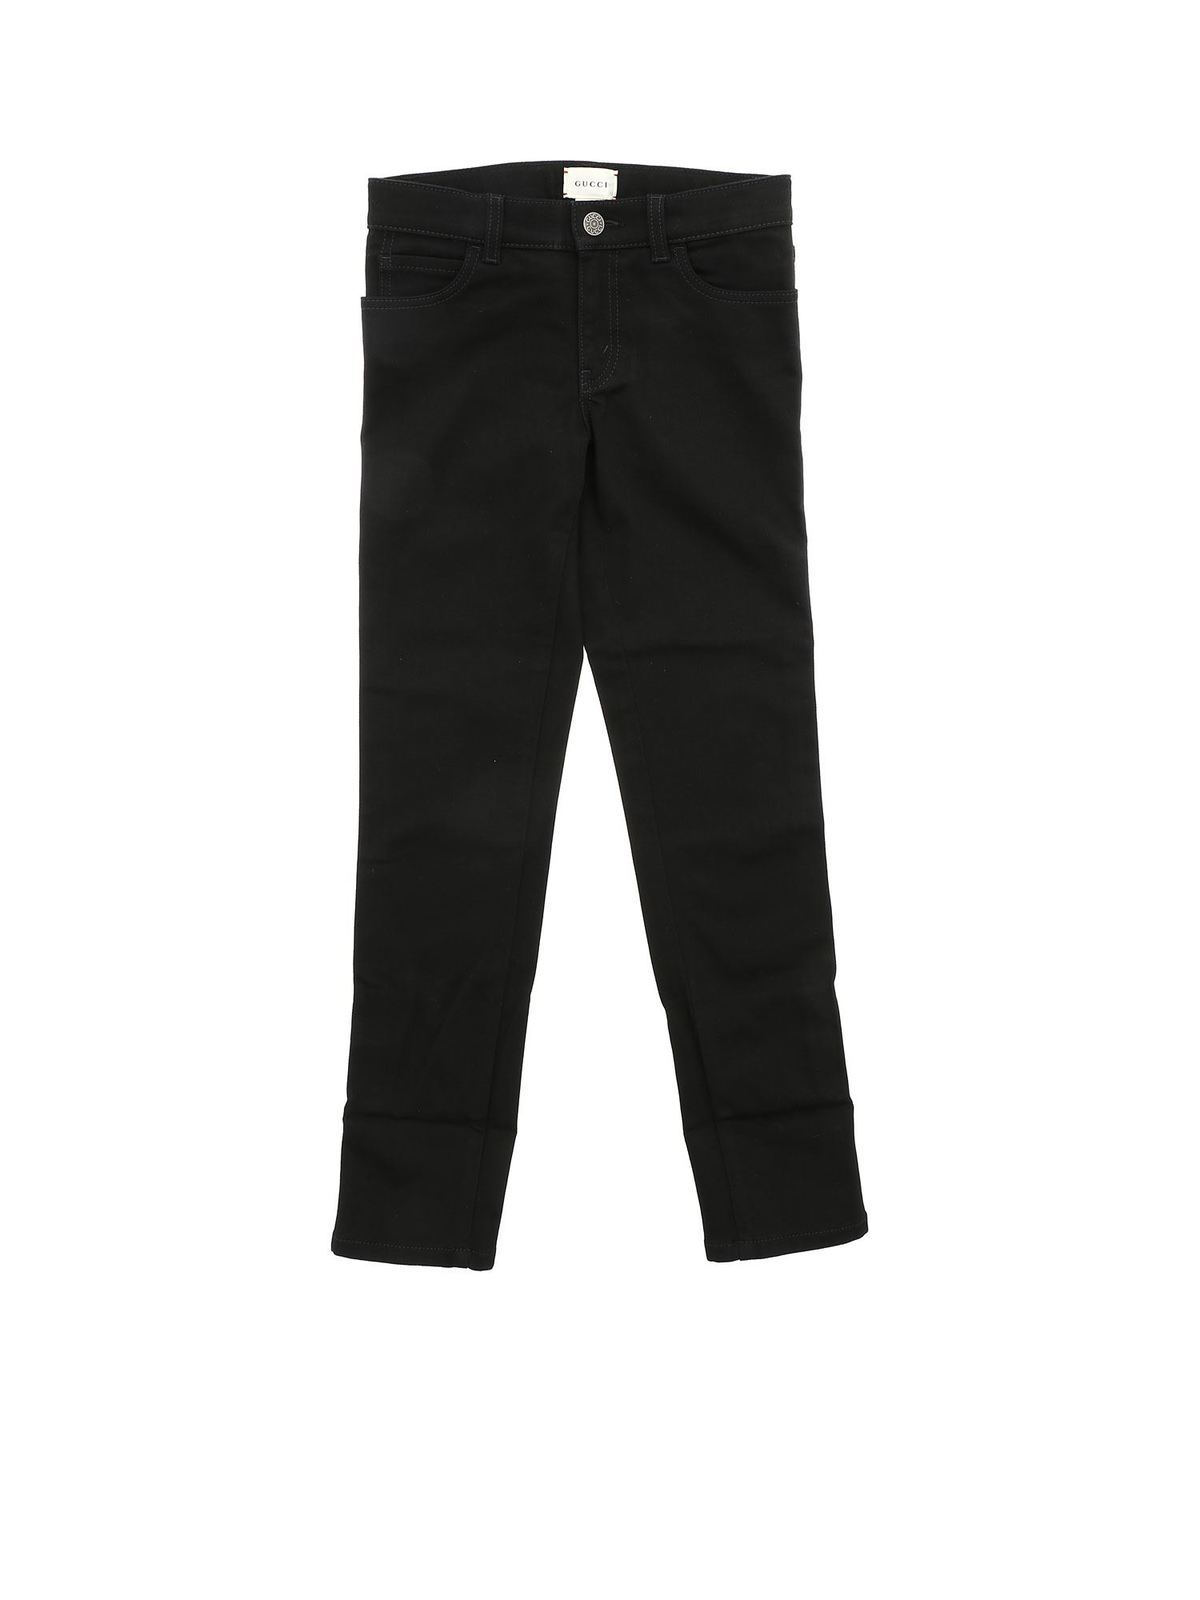 GUCCI BLACK JEANS WITH WEB DETAIL